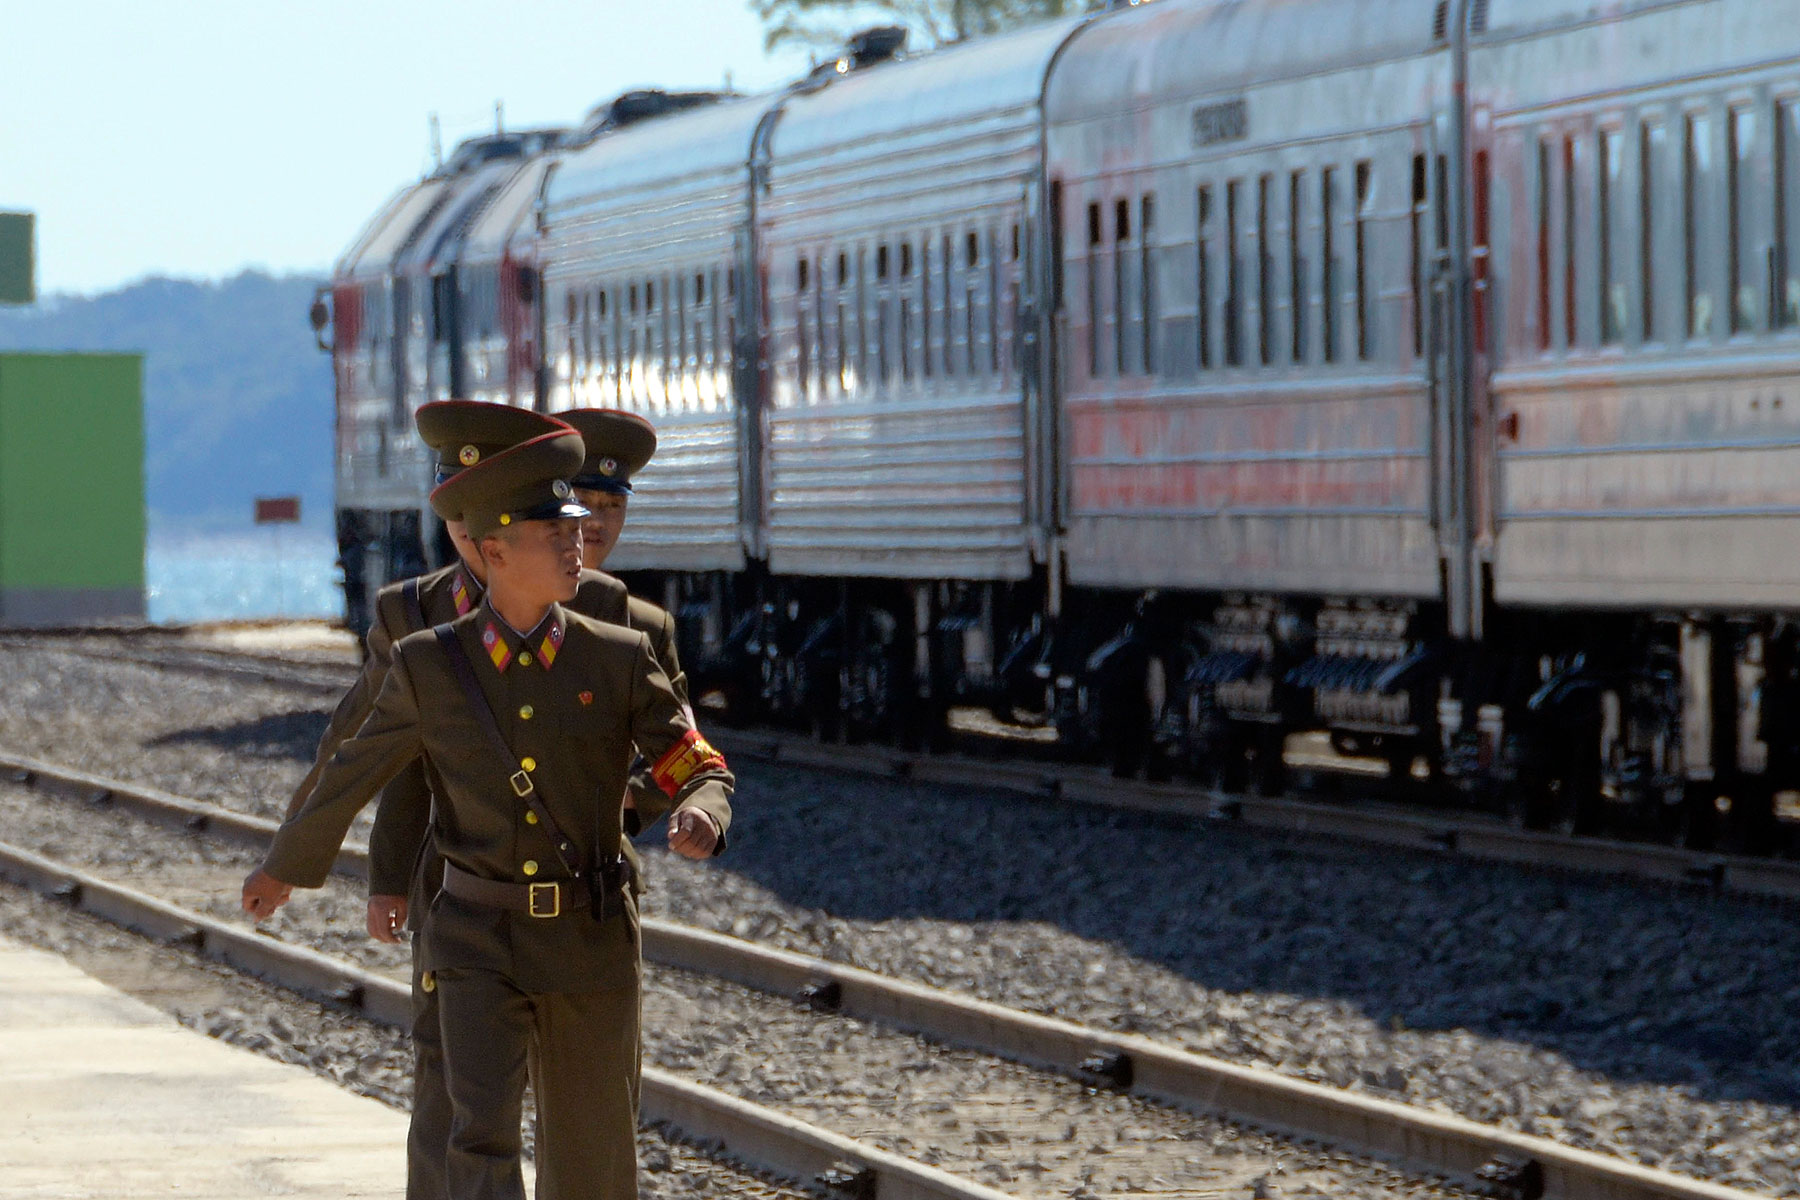 North Korean soldiers march near trains after a ceremony to mark the re-opening of a railway link between Russia and North Korea at the port of Rajin Sept. 22, 2013 (Yuri Maltsev—Reuters)